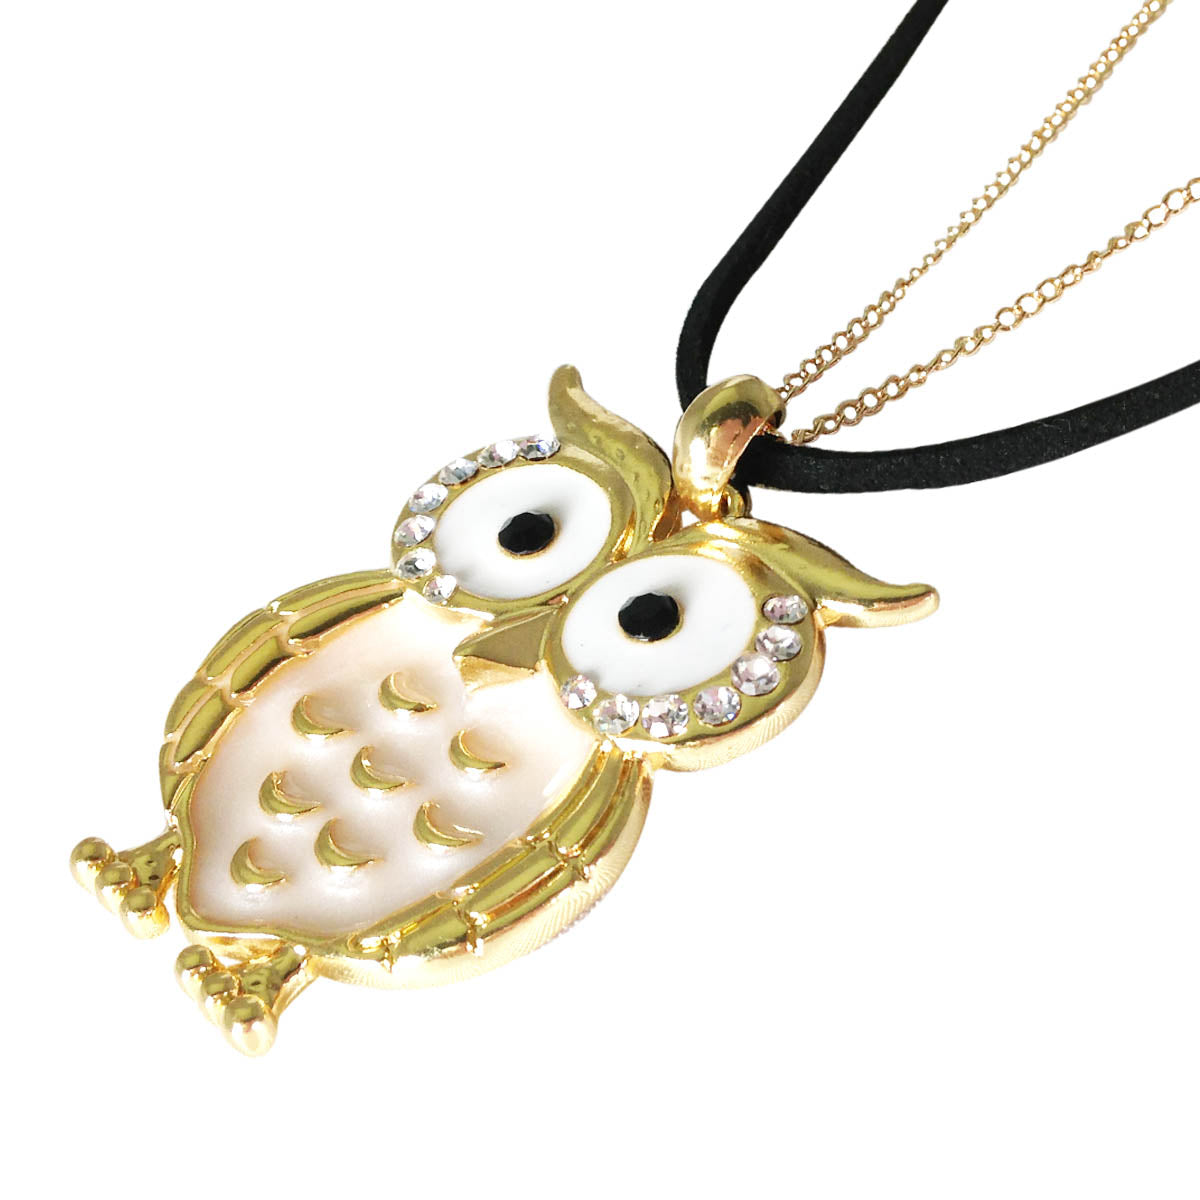 Owl Pendant Necklace with Crystal Rimmed Eyes